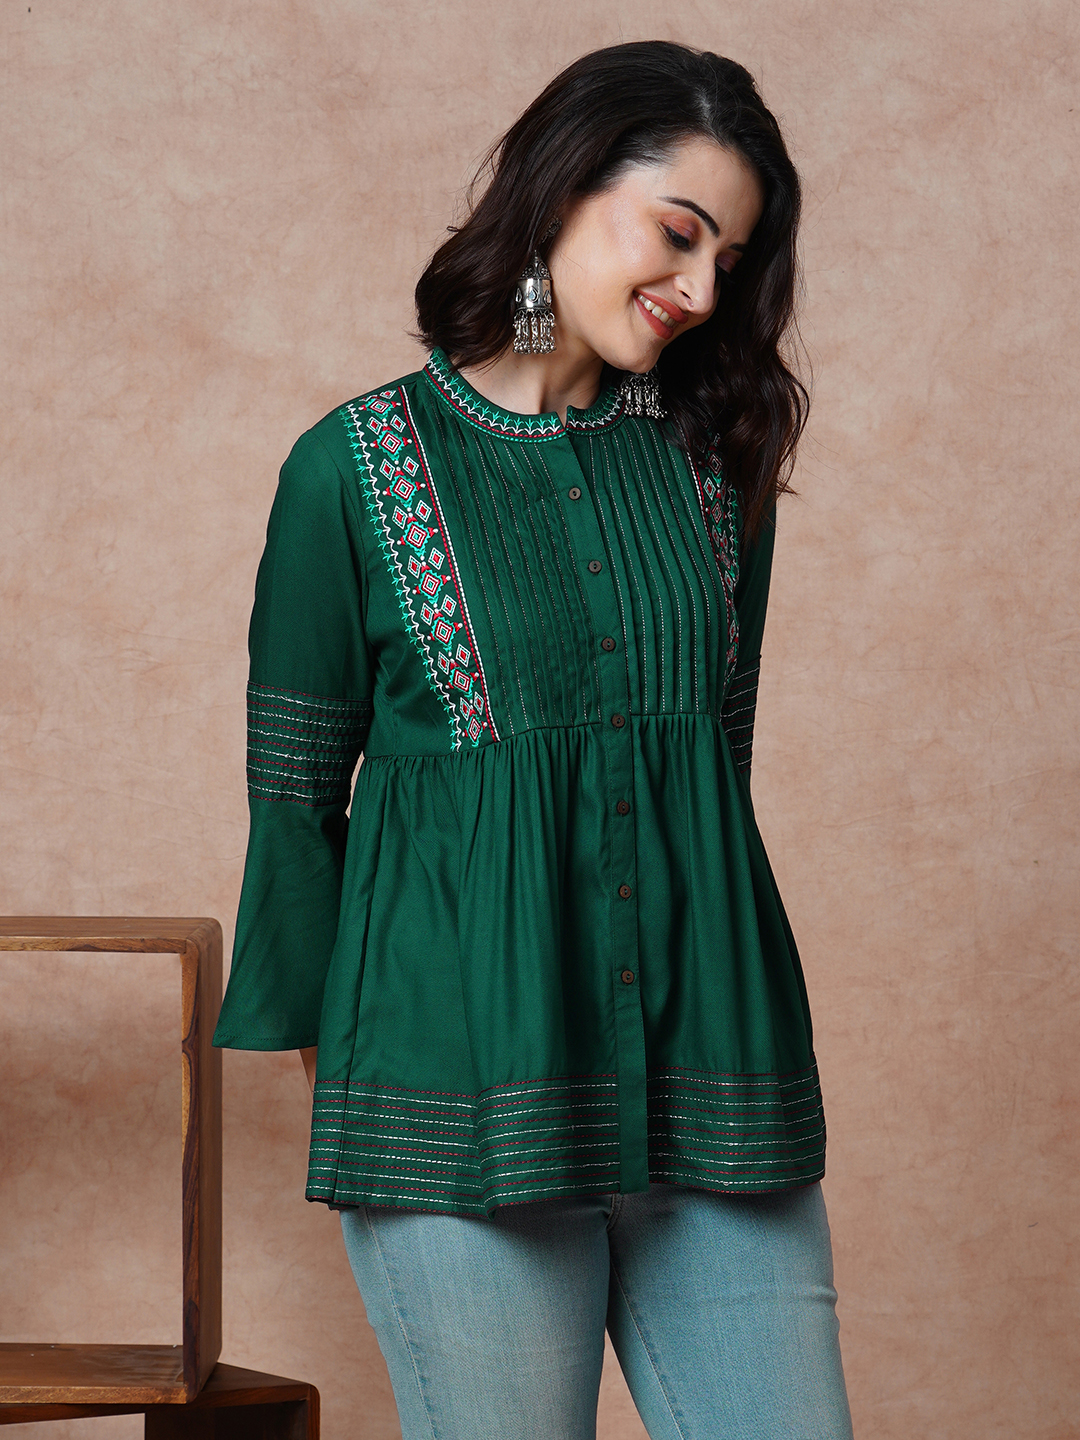 Globus Women Green Embroidered Yoke Bell Sleeves A-Line Tunic